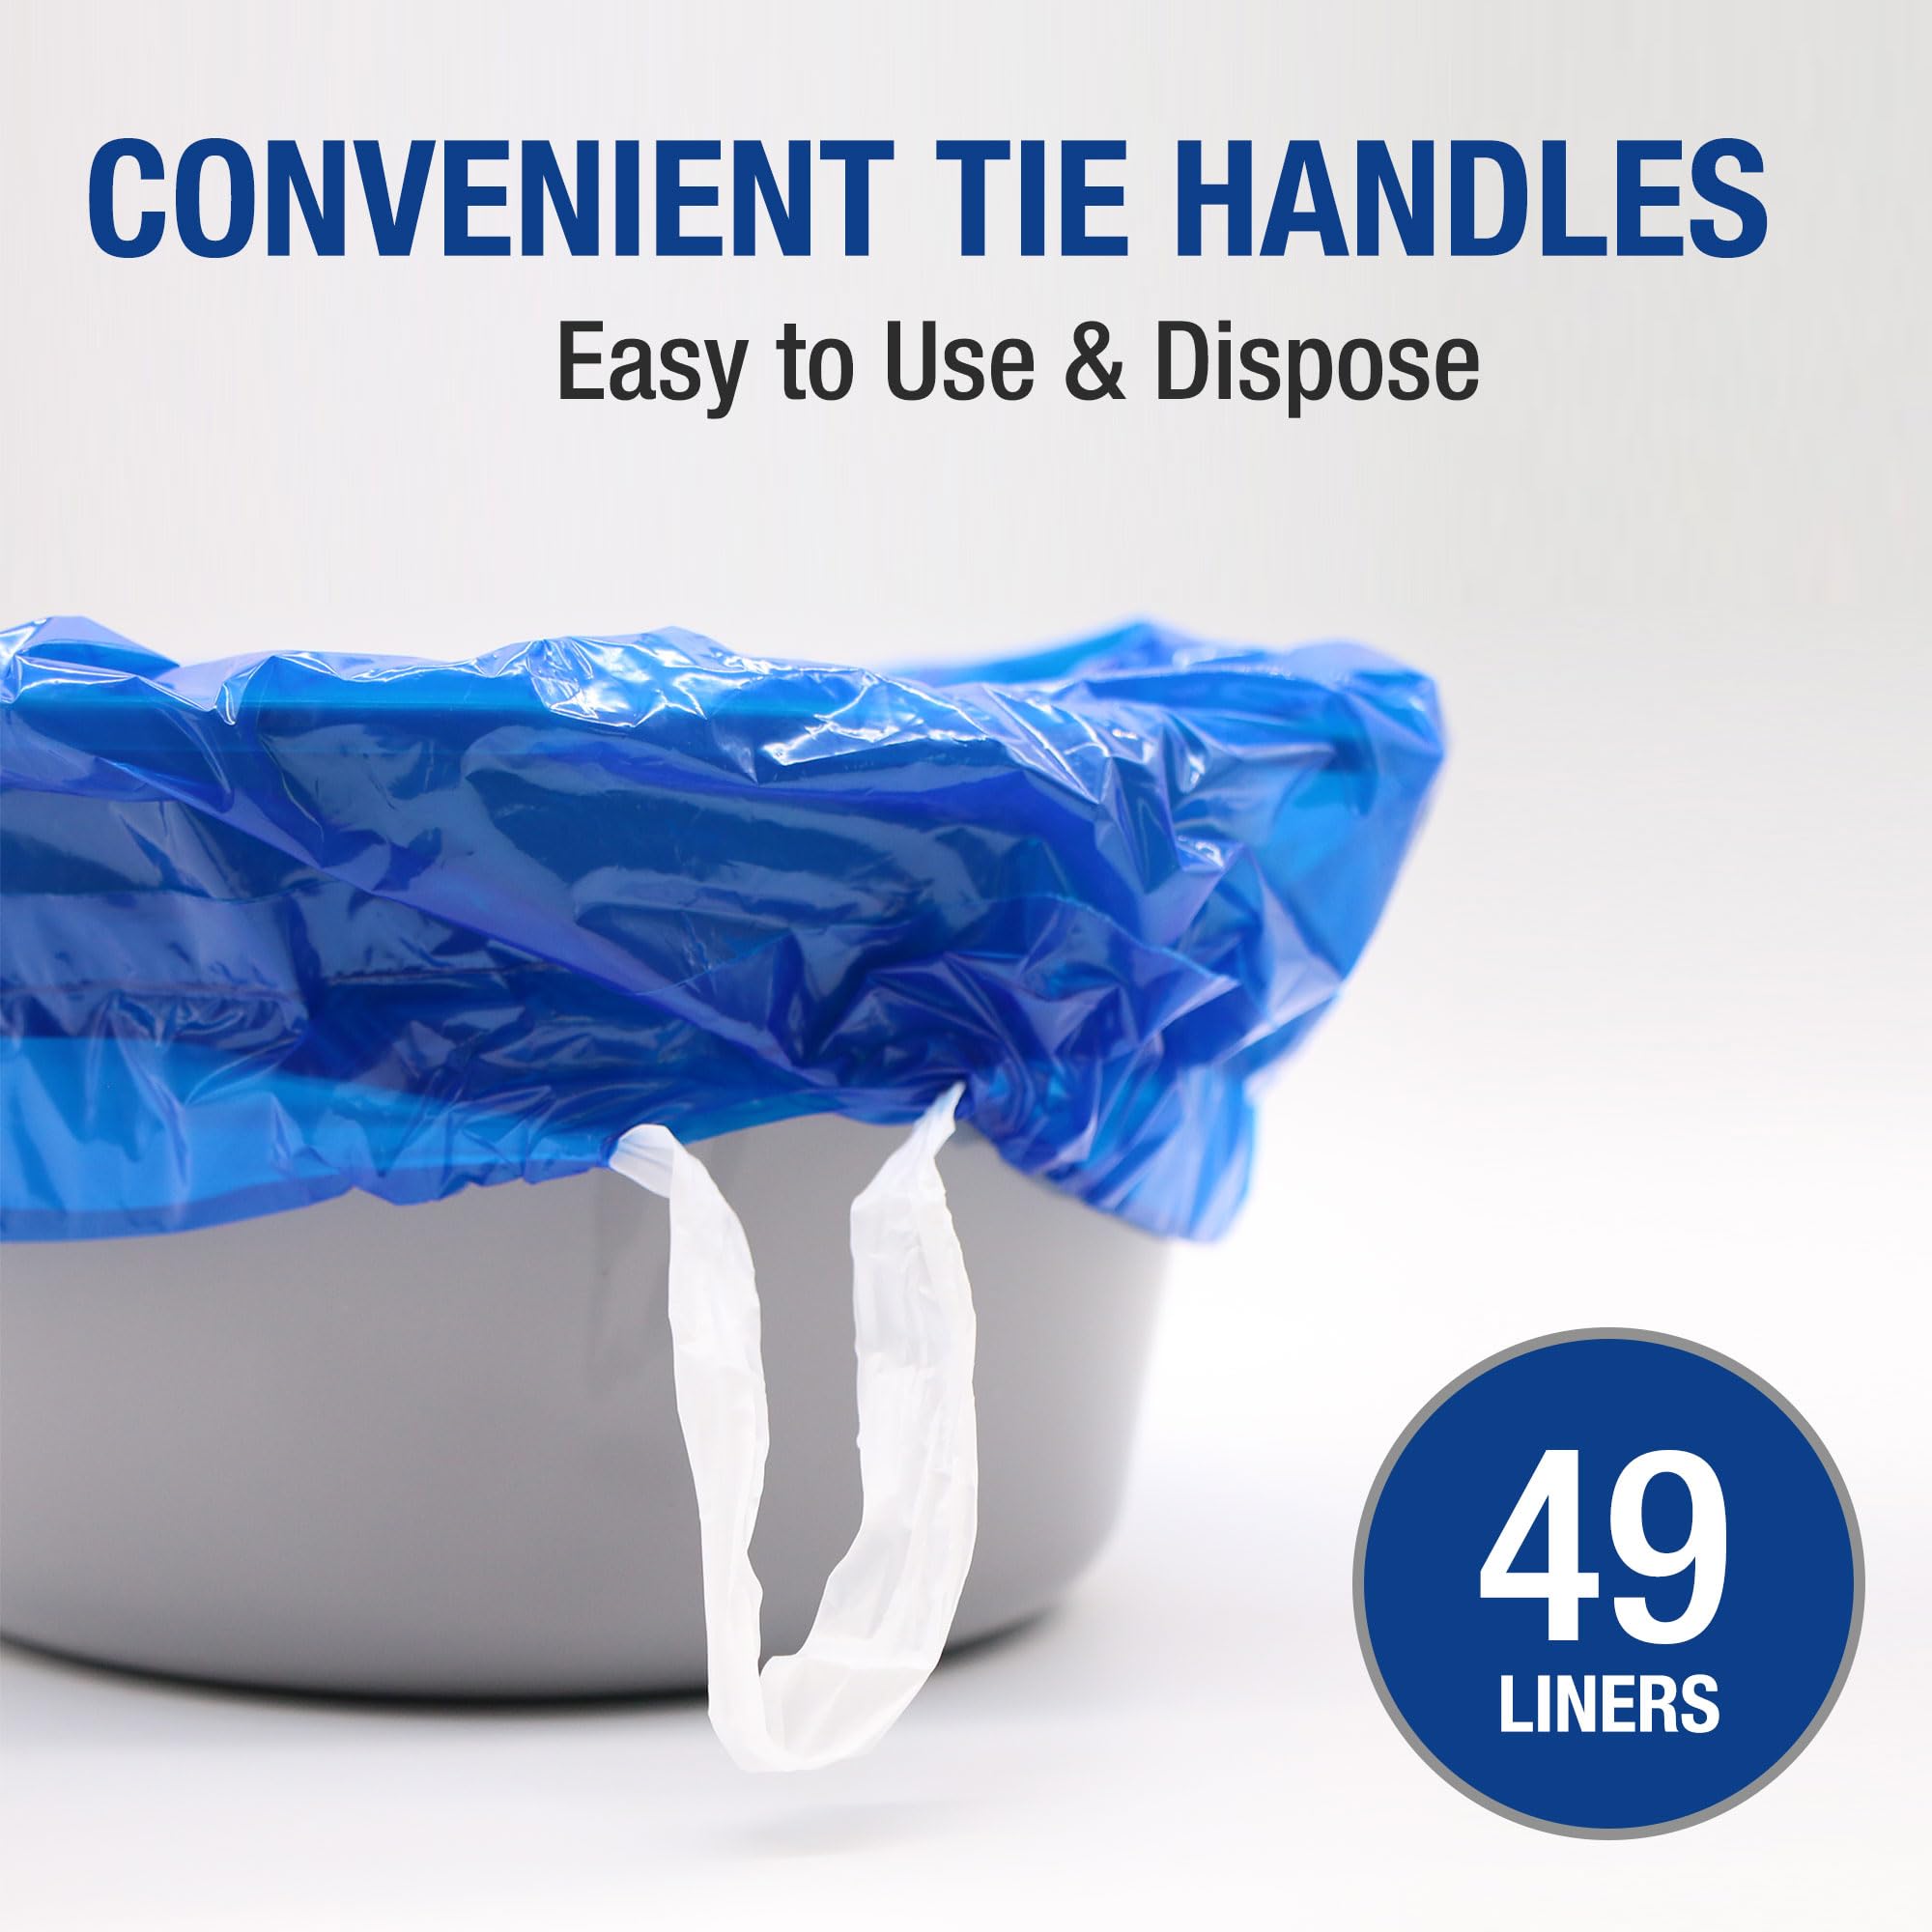 DMI Disposable Commode Liners, Mess Free Clean Up, Easy Tie Handles, Disposable, FSA & HSA Eligible, Dark Blue Color, Pack of 49